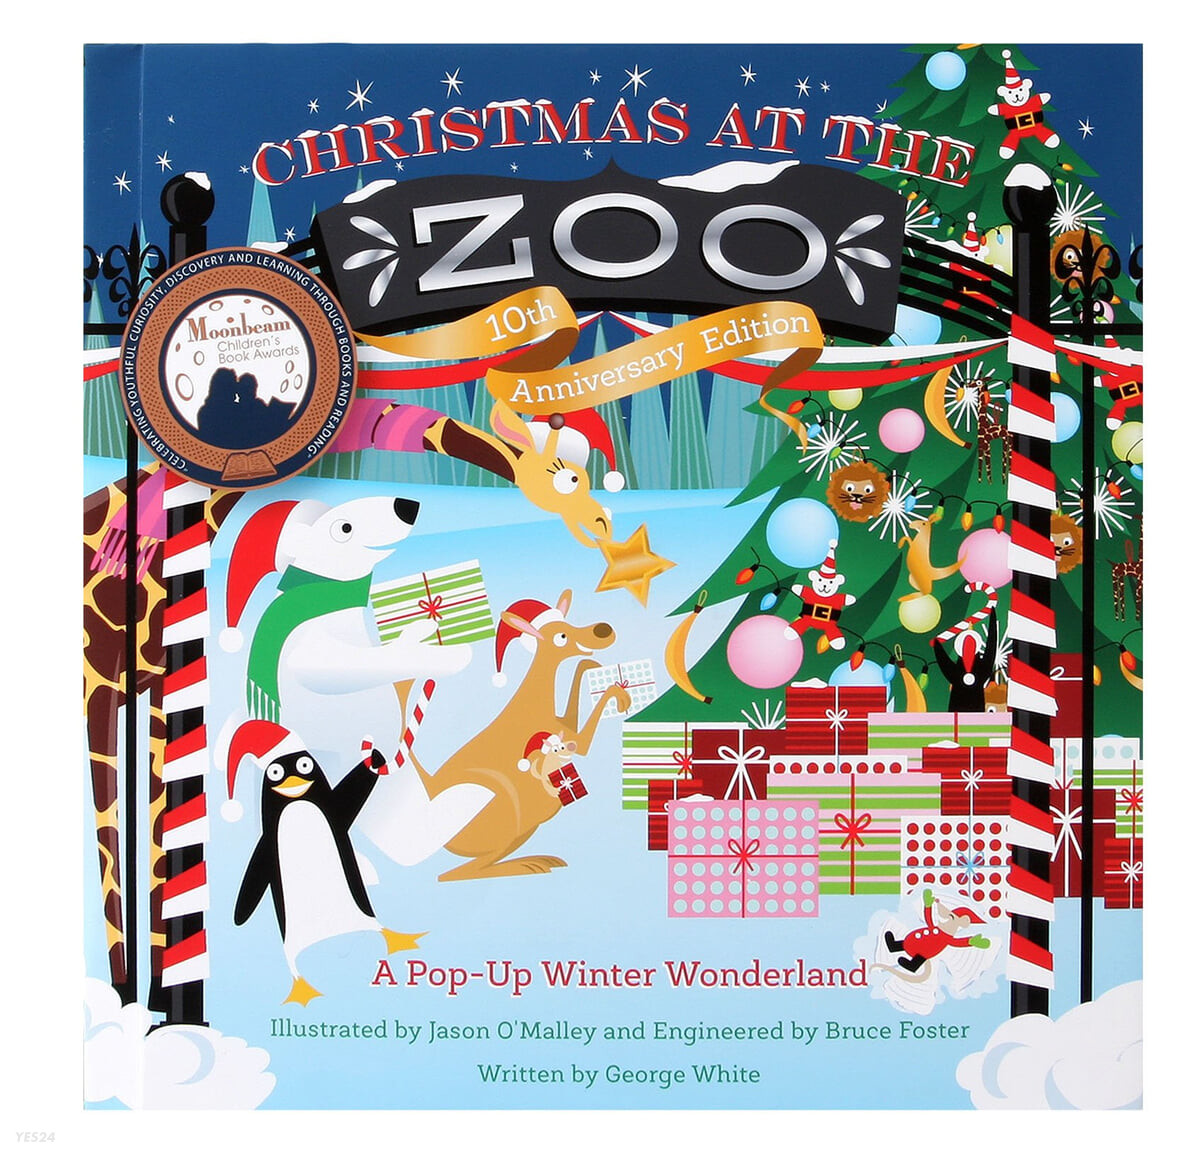 Christmas at the zoo: a pop-up winter wonderland